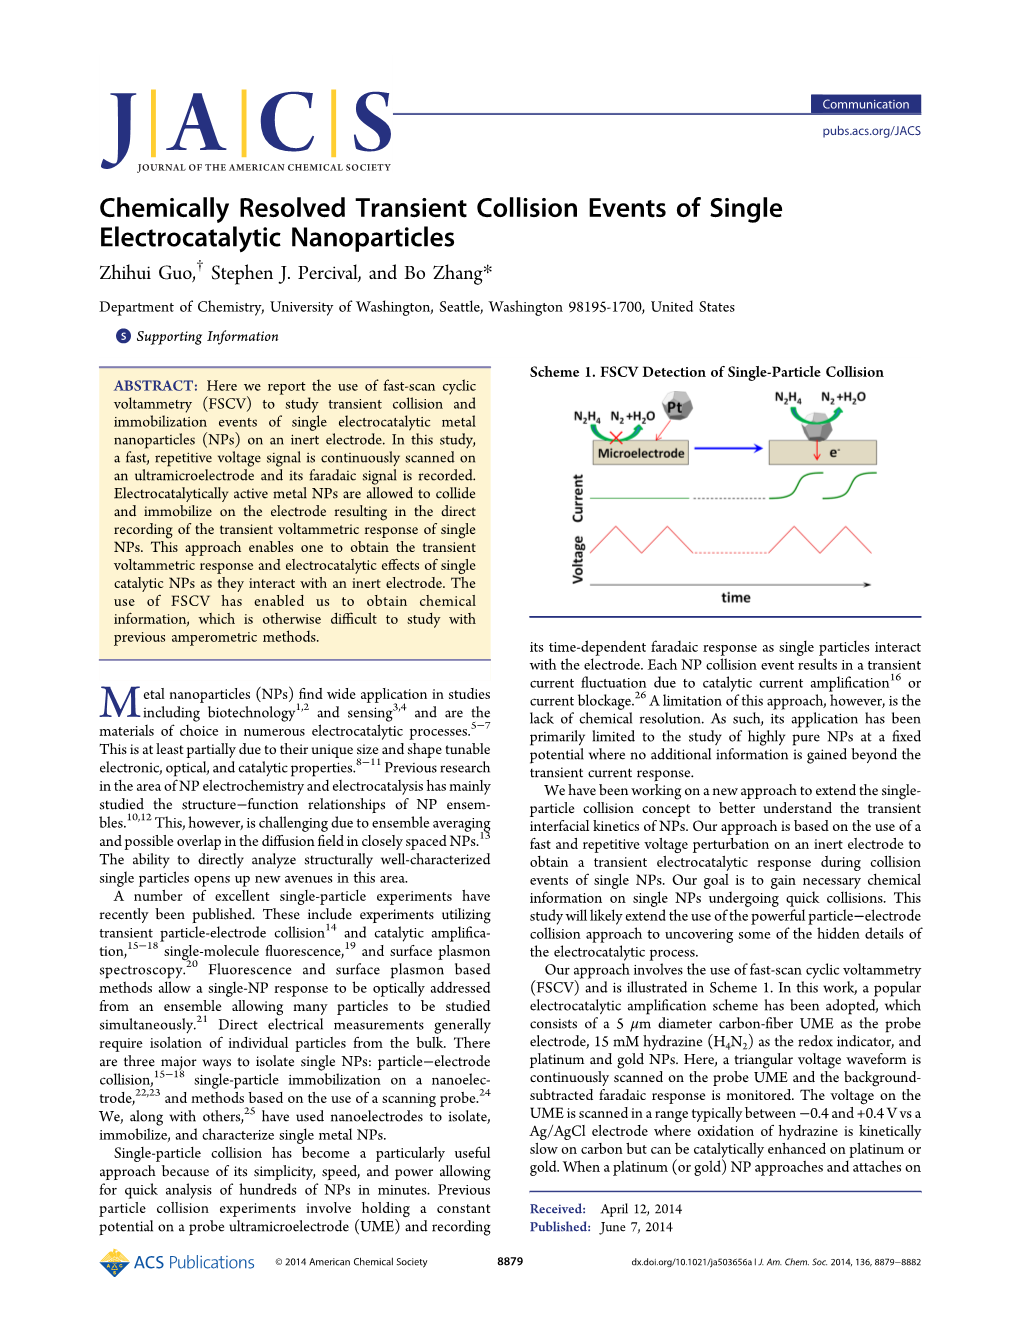 Chemically Resolved Transient Collision Events of Single Electrocatalytic Nanoparticles † Zhihui Guo, Stephen J